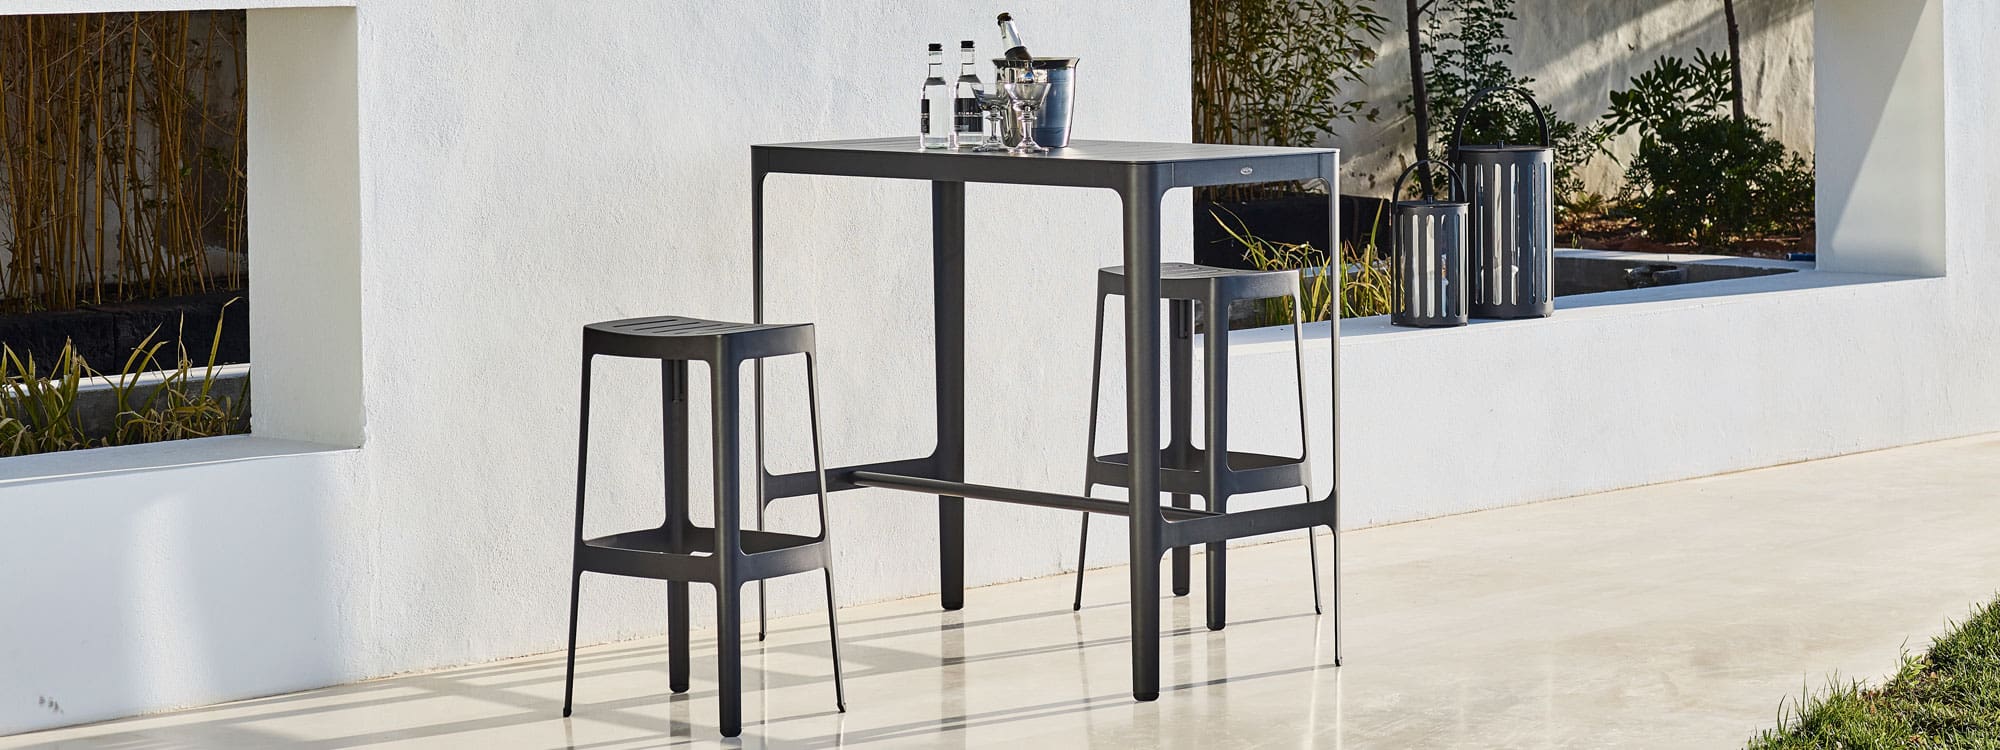 Image of black Cut high bar table and black garden bar stools by Cane-line